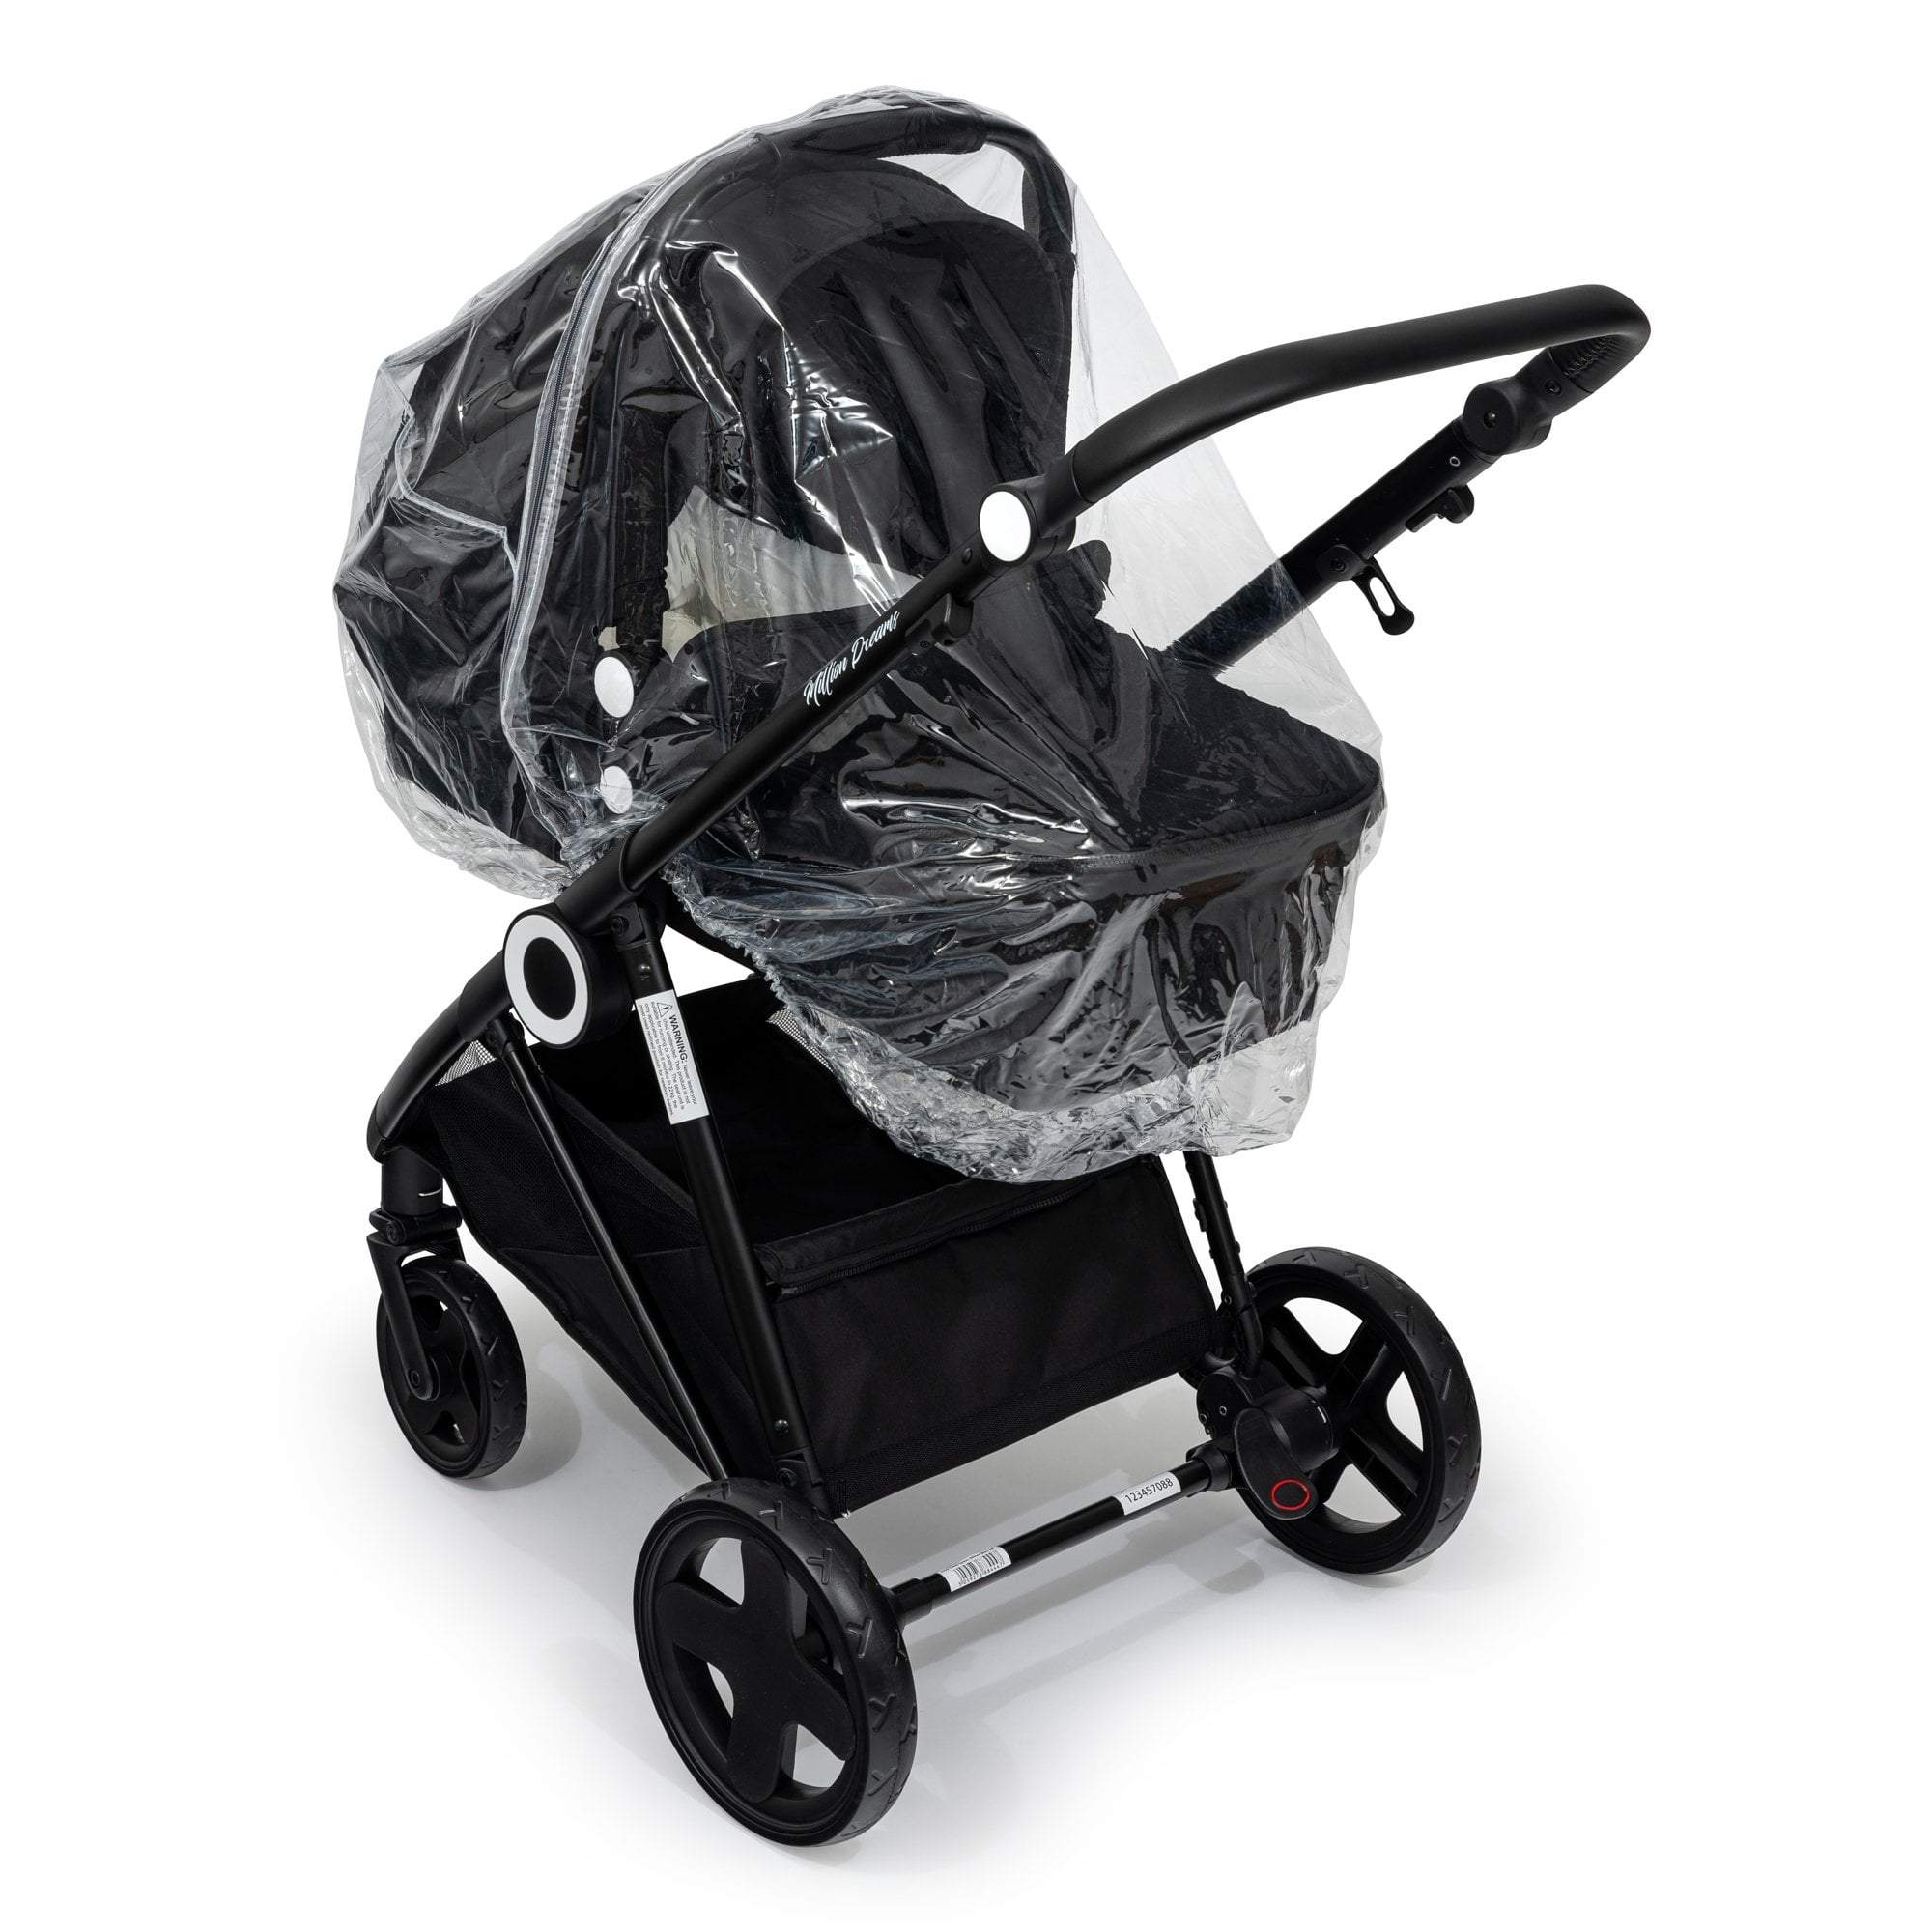 Carrycot Raincover Compatible With Inglesina - Fits All Models - For Your Little One